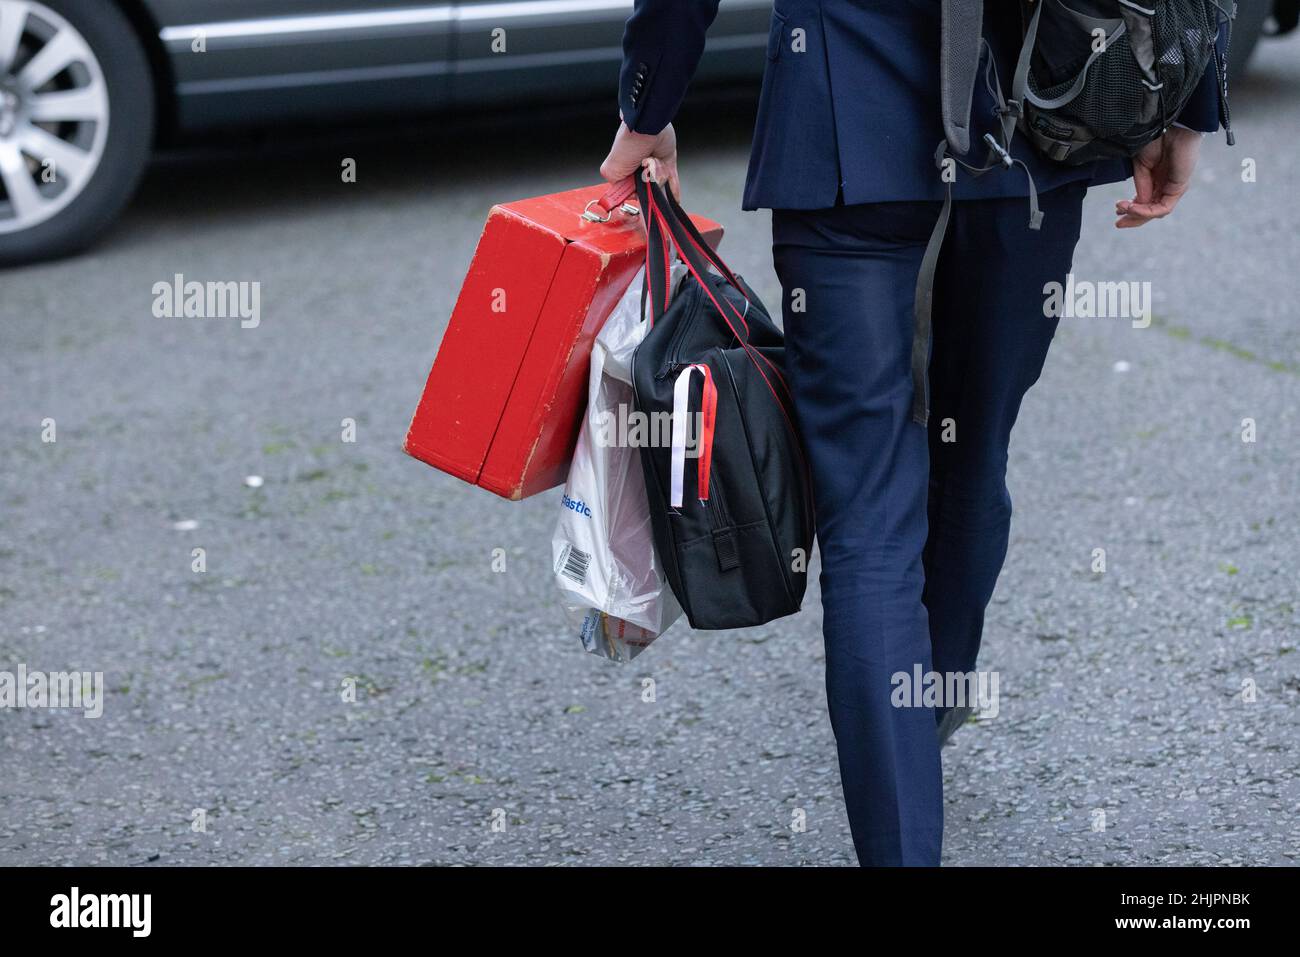 Young MP holding a red box suitcase arrives at No.10 Downing Street, London, UK Stock Photo